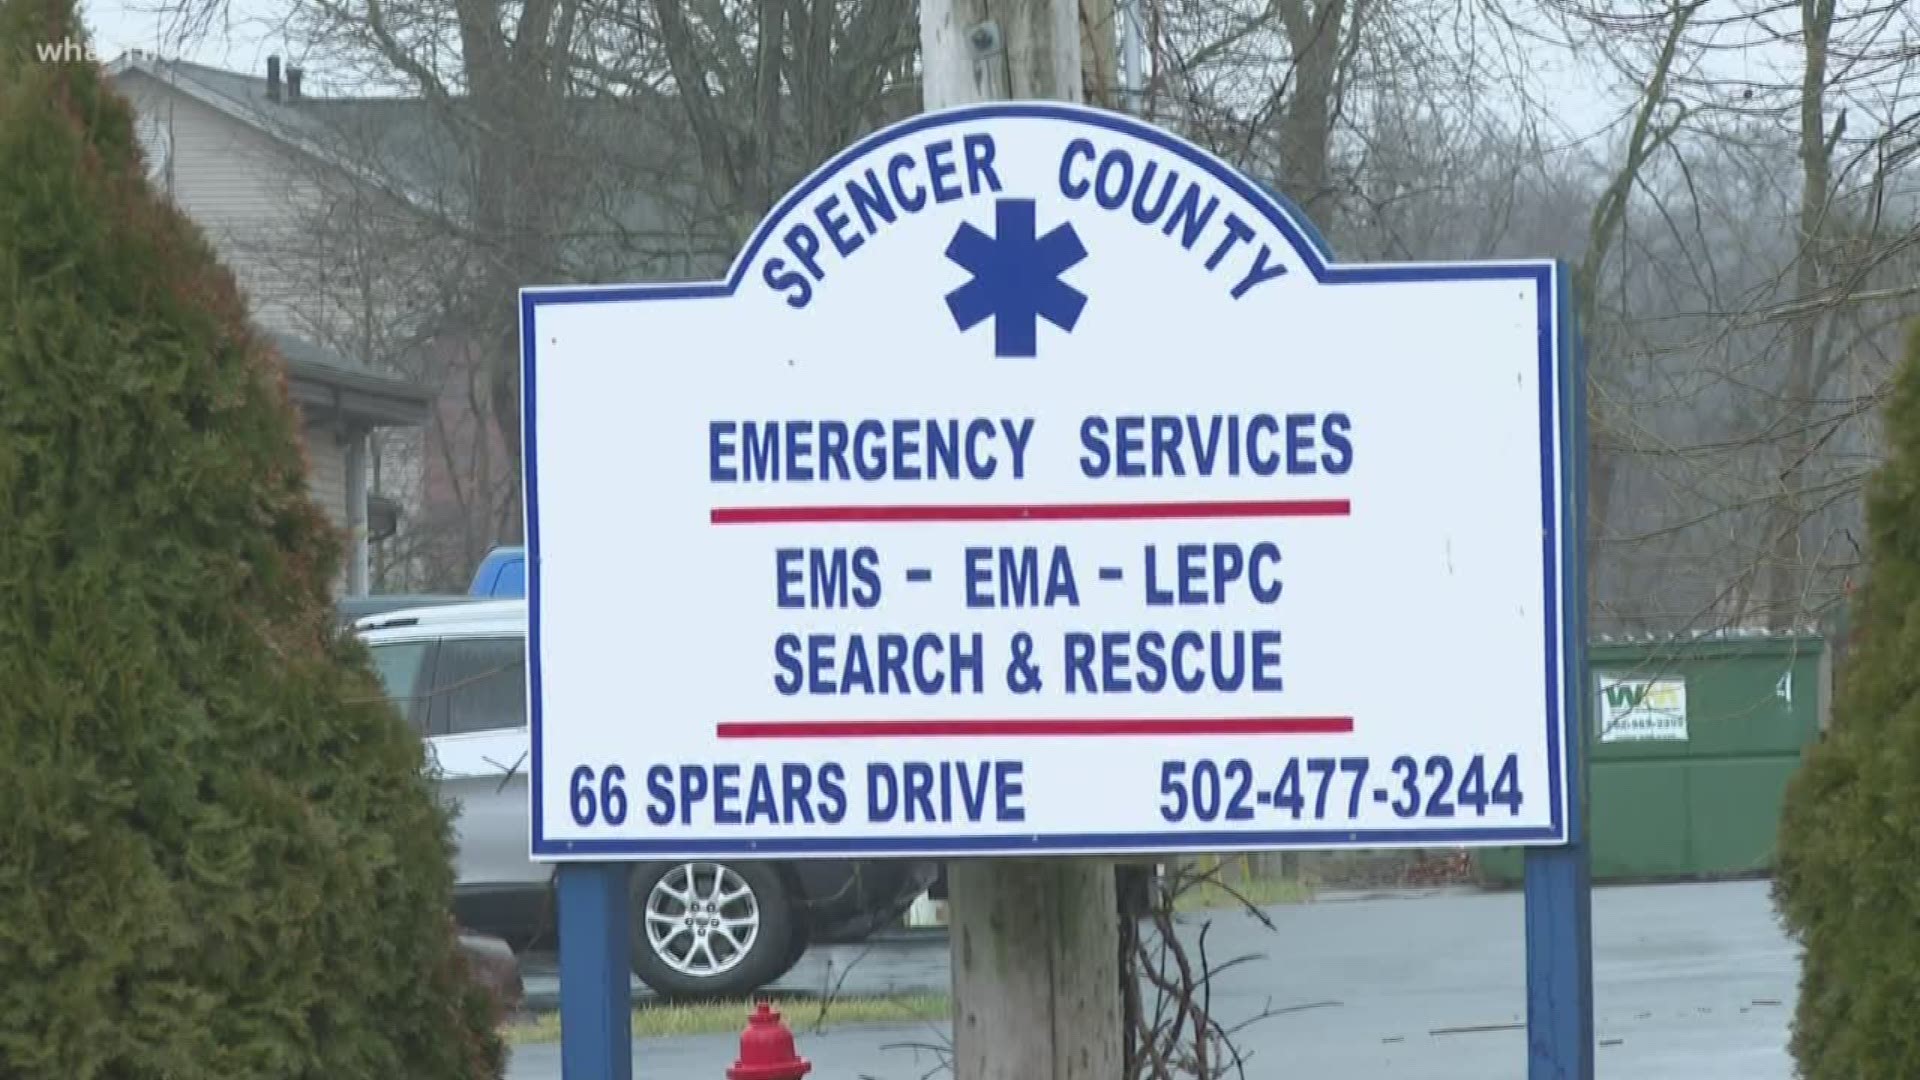 Ten full-time Spencer County, kentucky  EMTs and paramedics provide lifesaving care for the county's nearly 20,000 people.